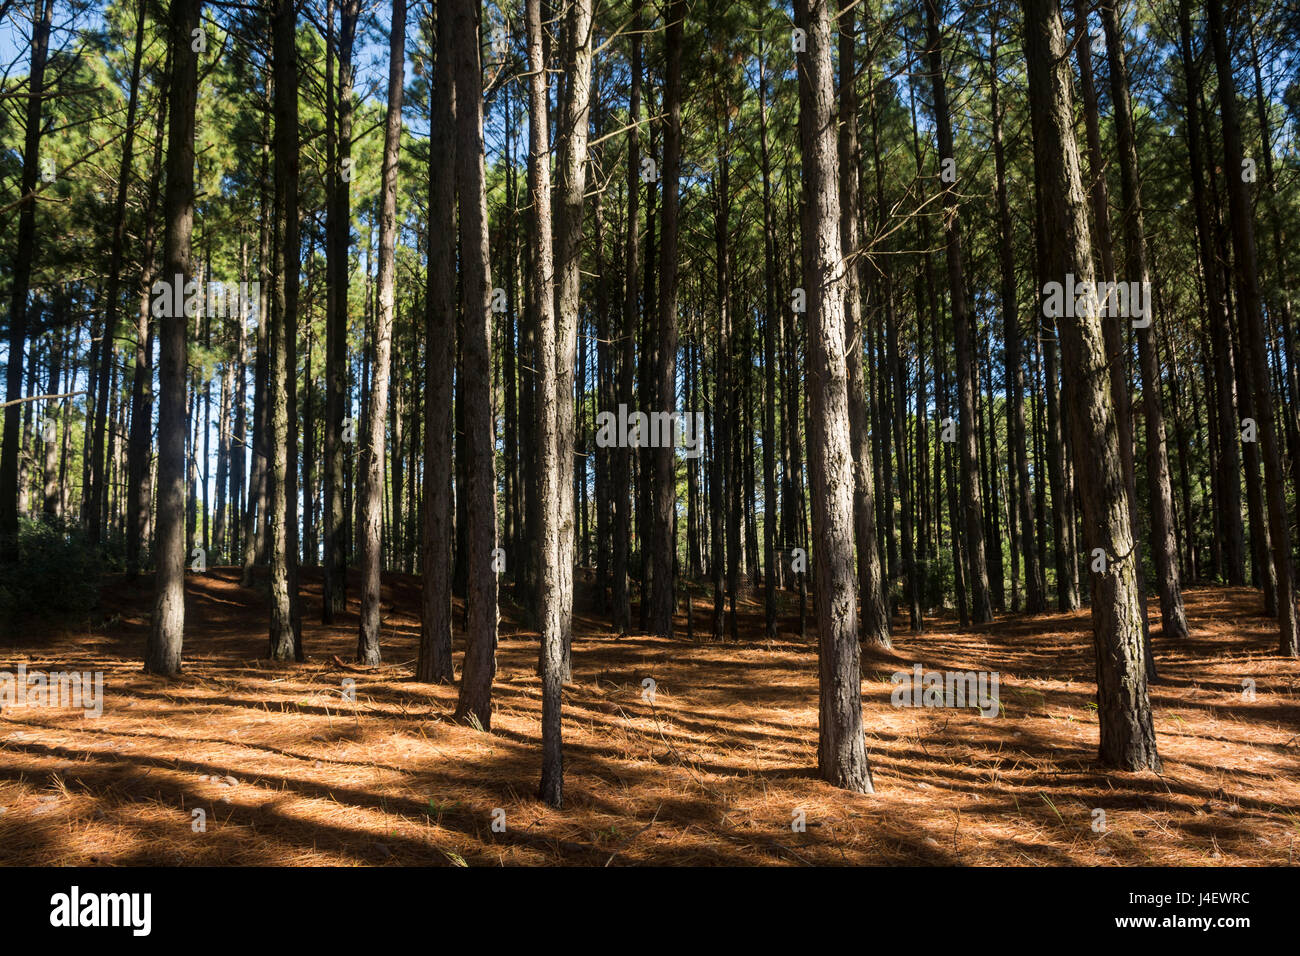 Pine trees in woodland, Buenos Aires, Argentina Stock Photo